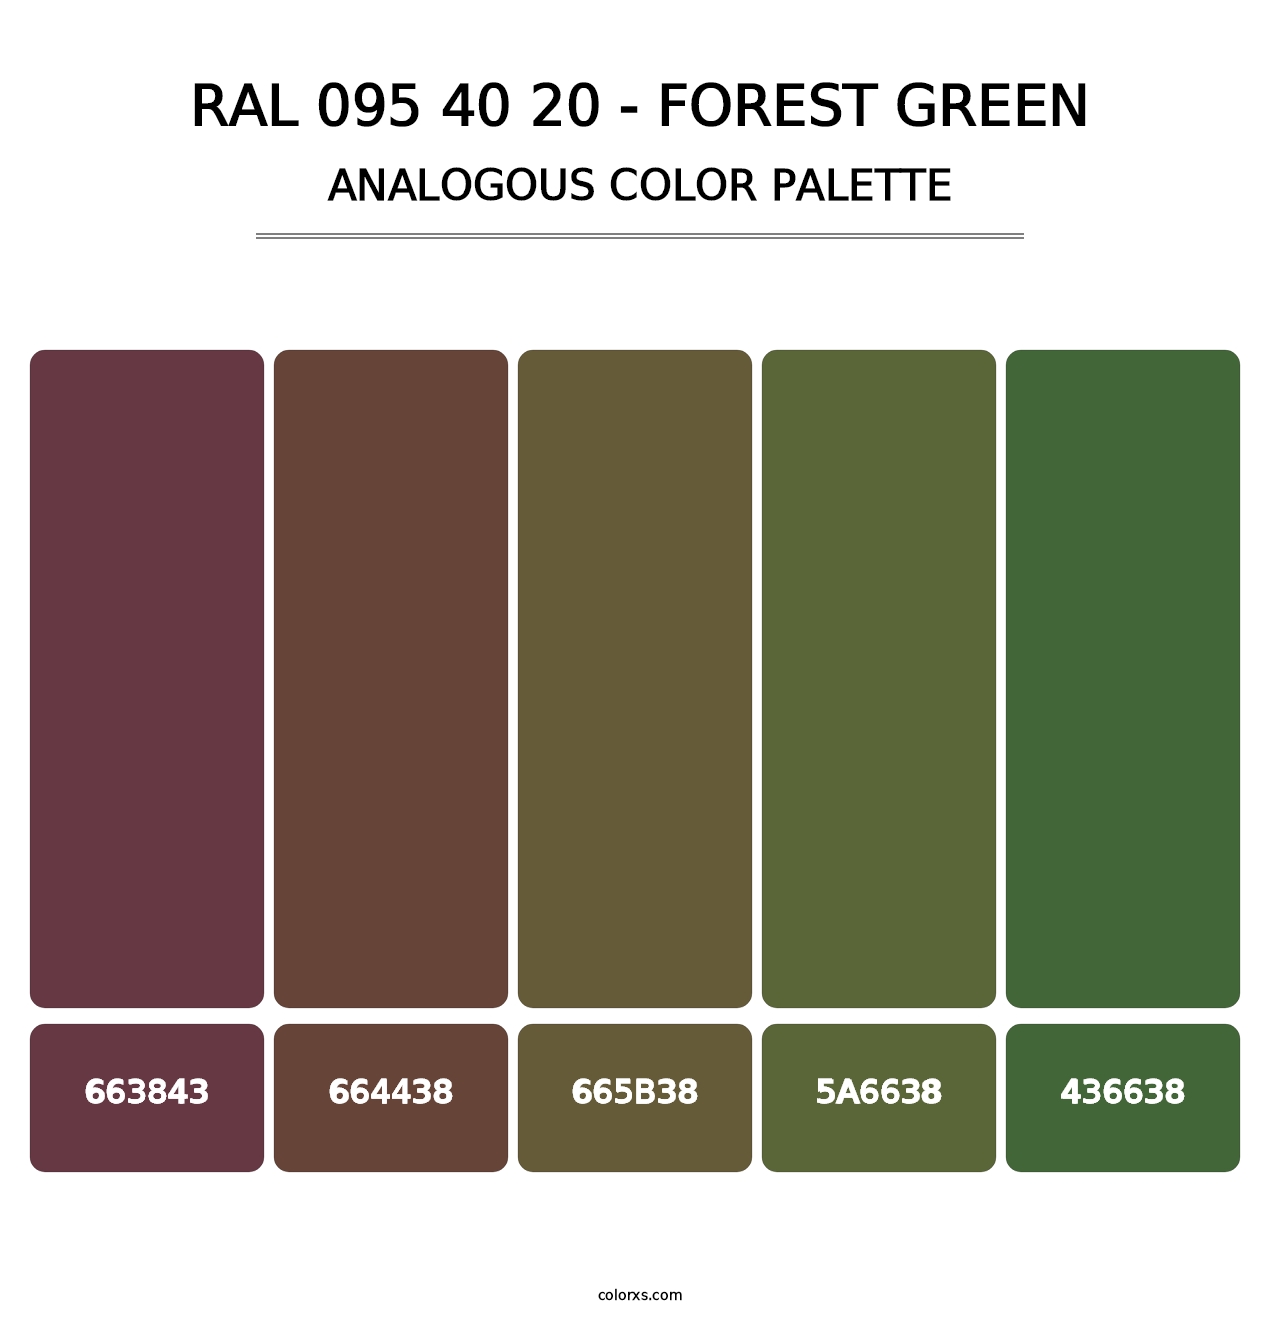 RAL 095 40 20 - Forest Green - Analogous Color Palette